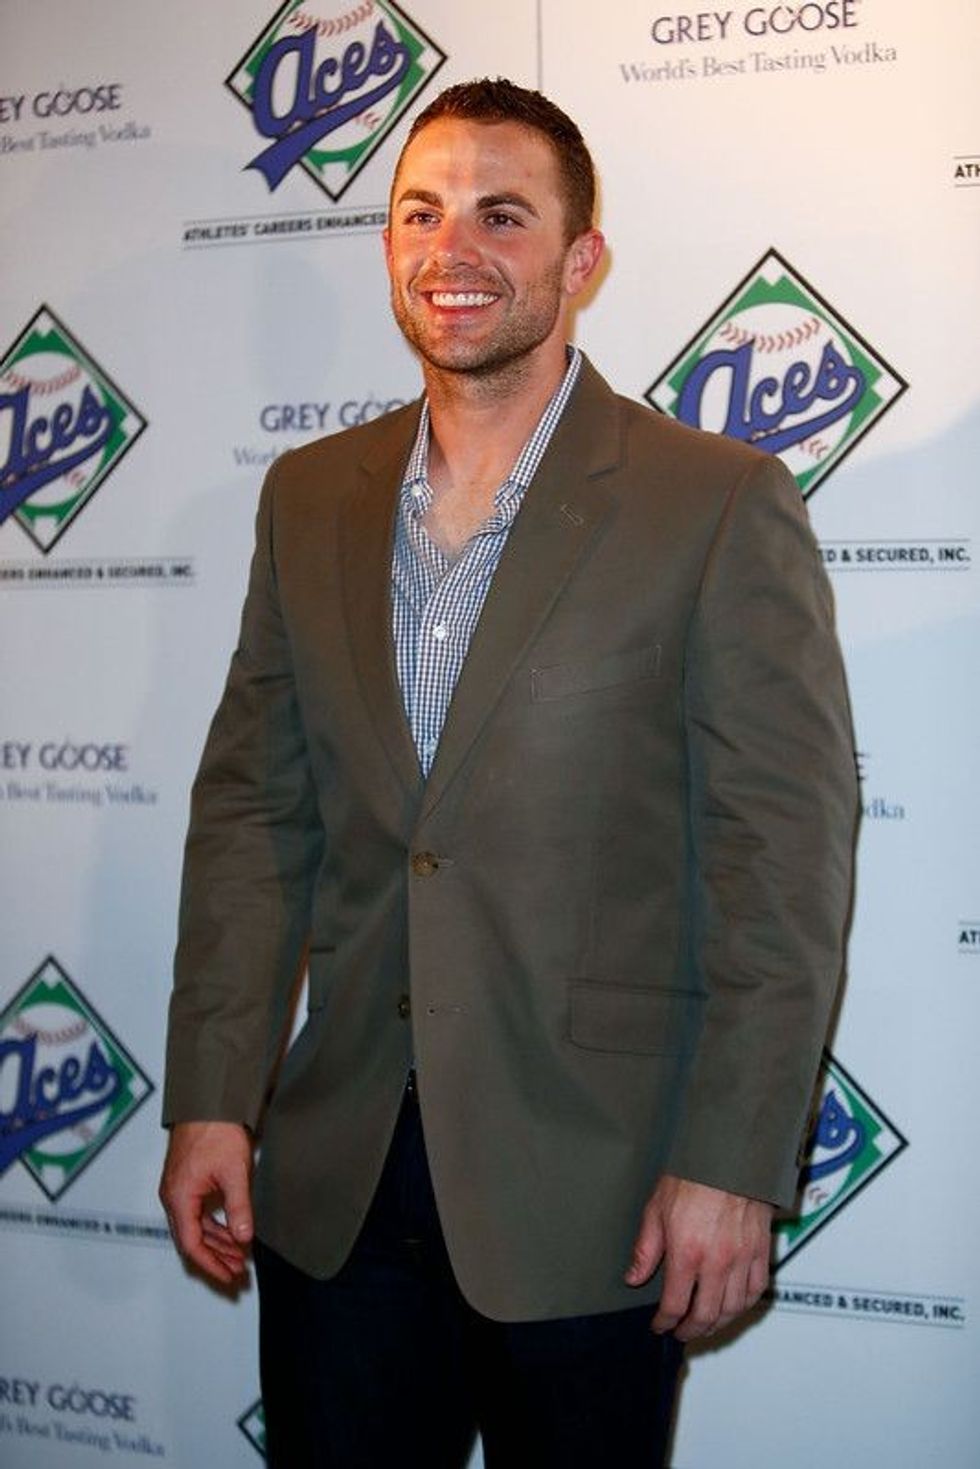 David Wright is a famous American baseball player who spent his entire career of 14 years with the New York Mets.